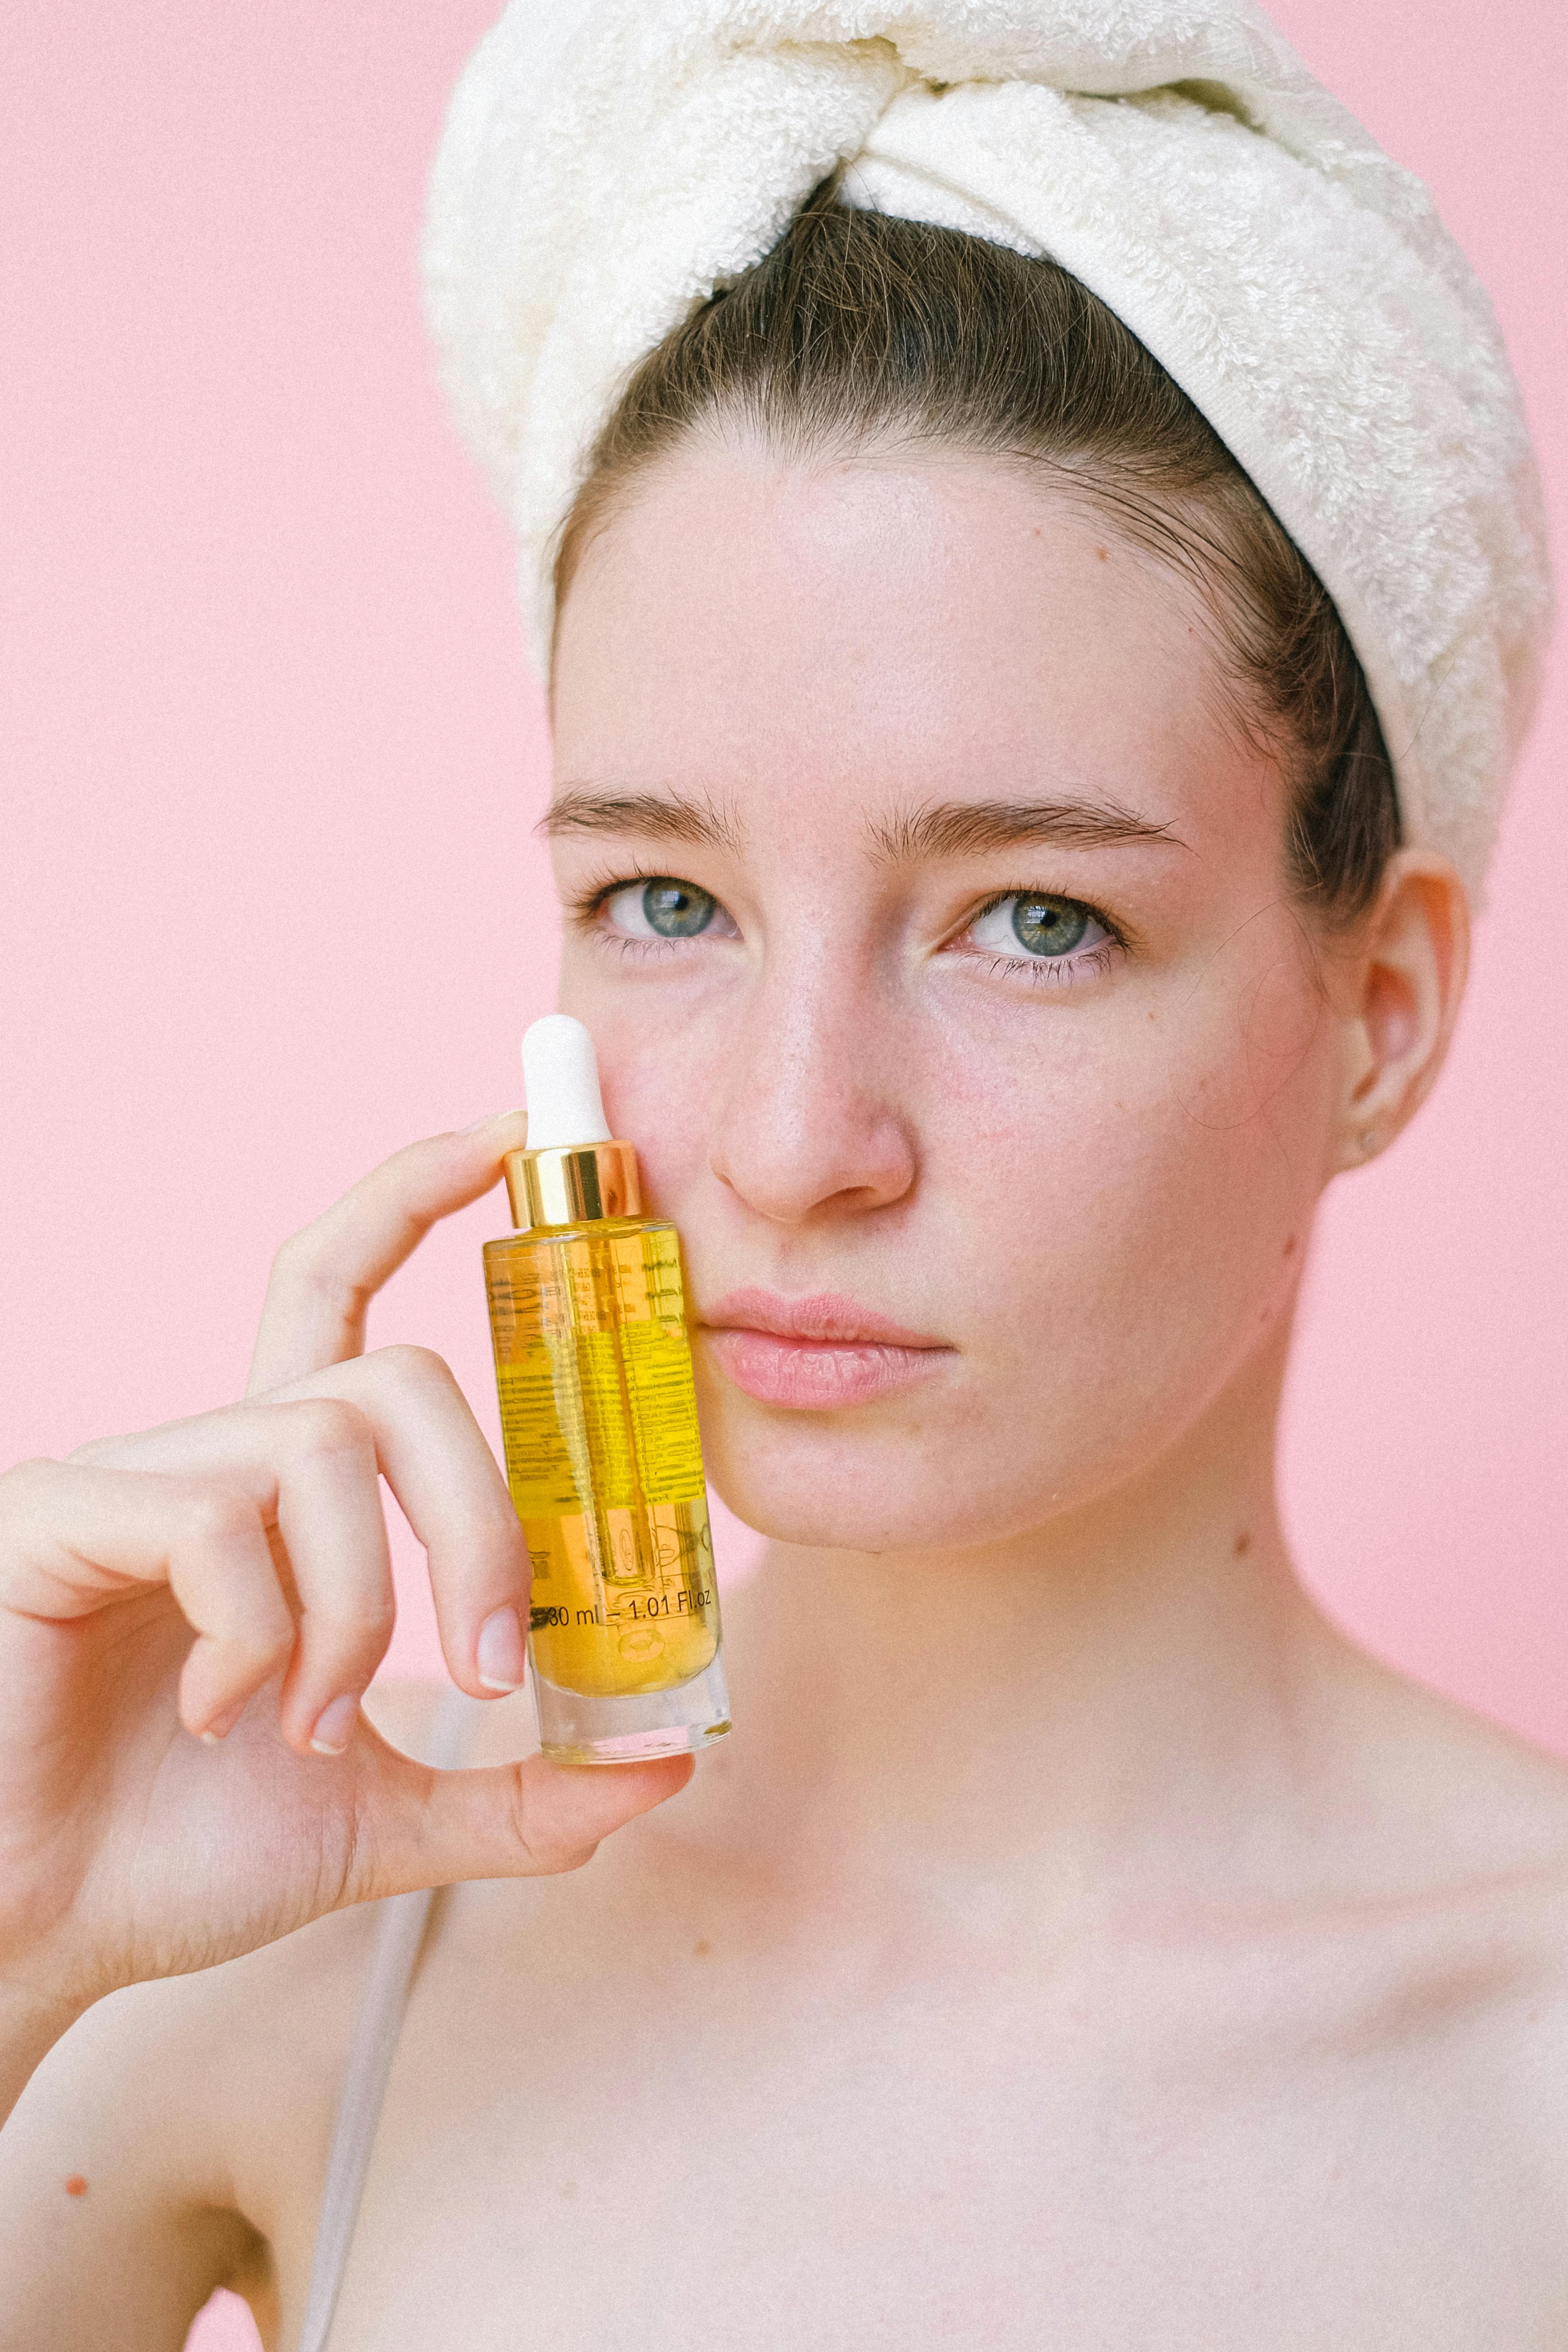 crop attractive woman with towel on head demonstrating cosmetic product